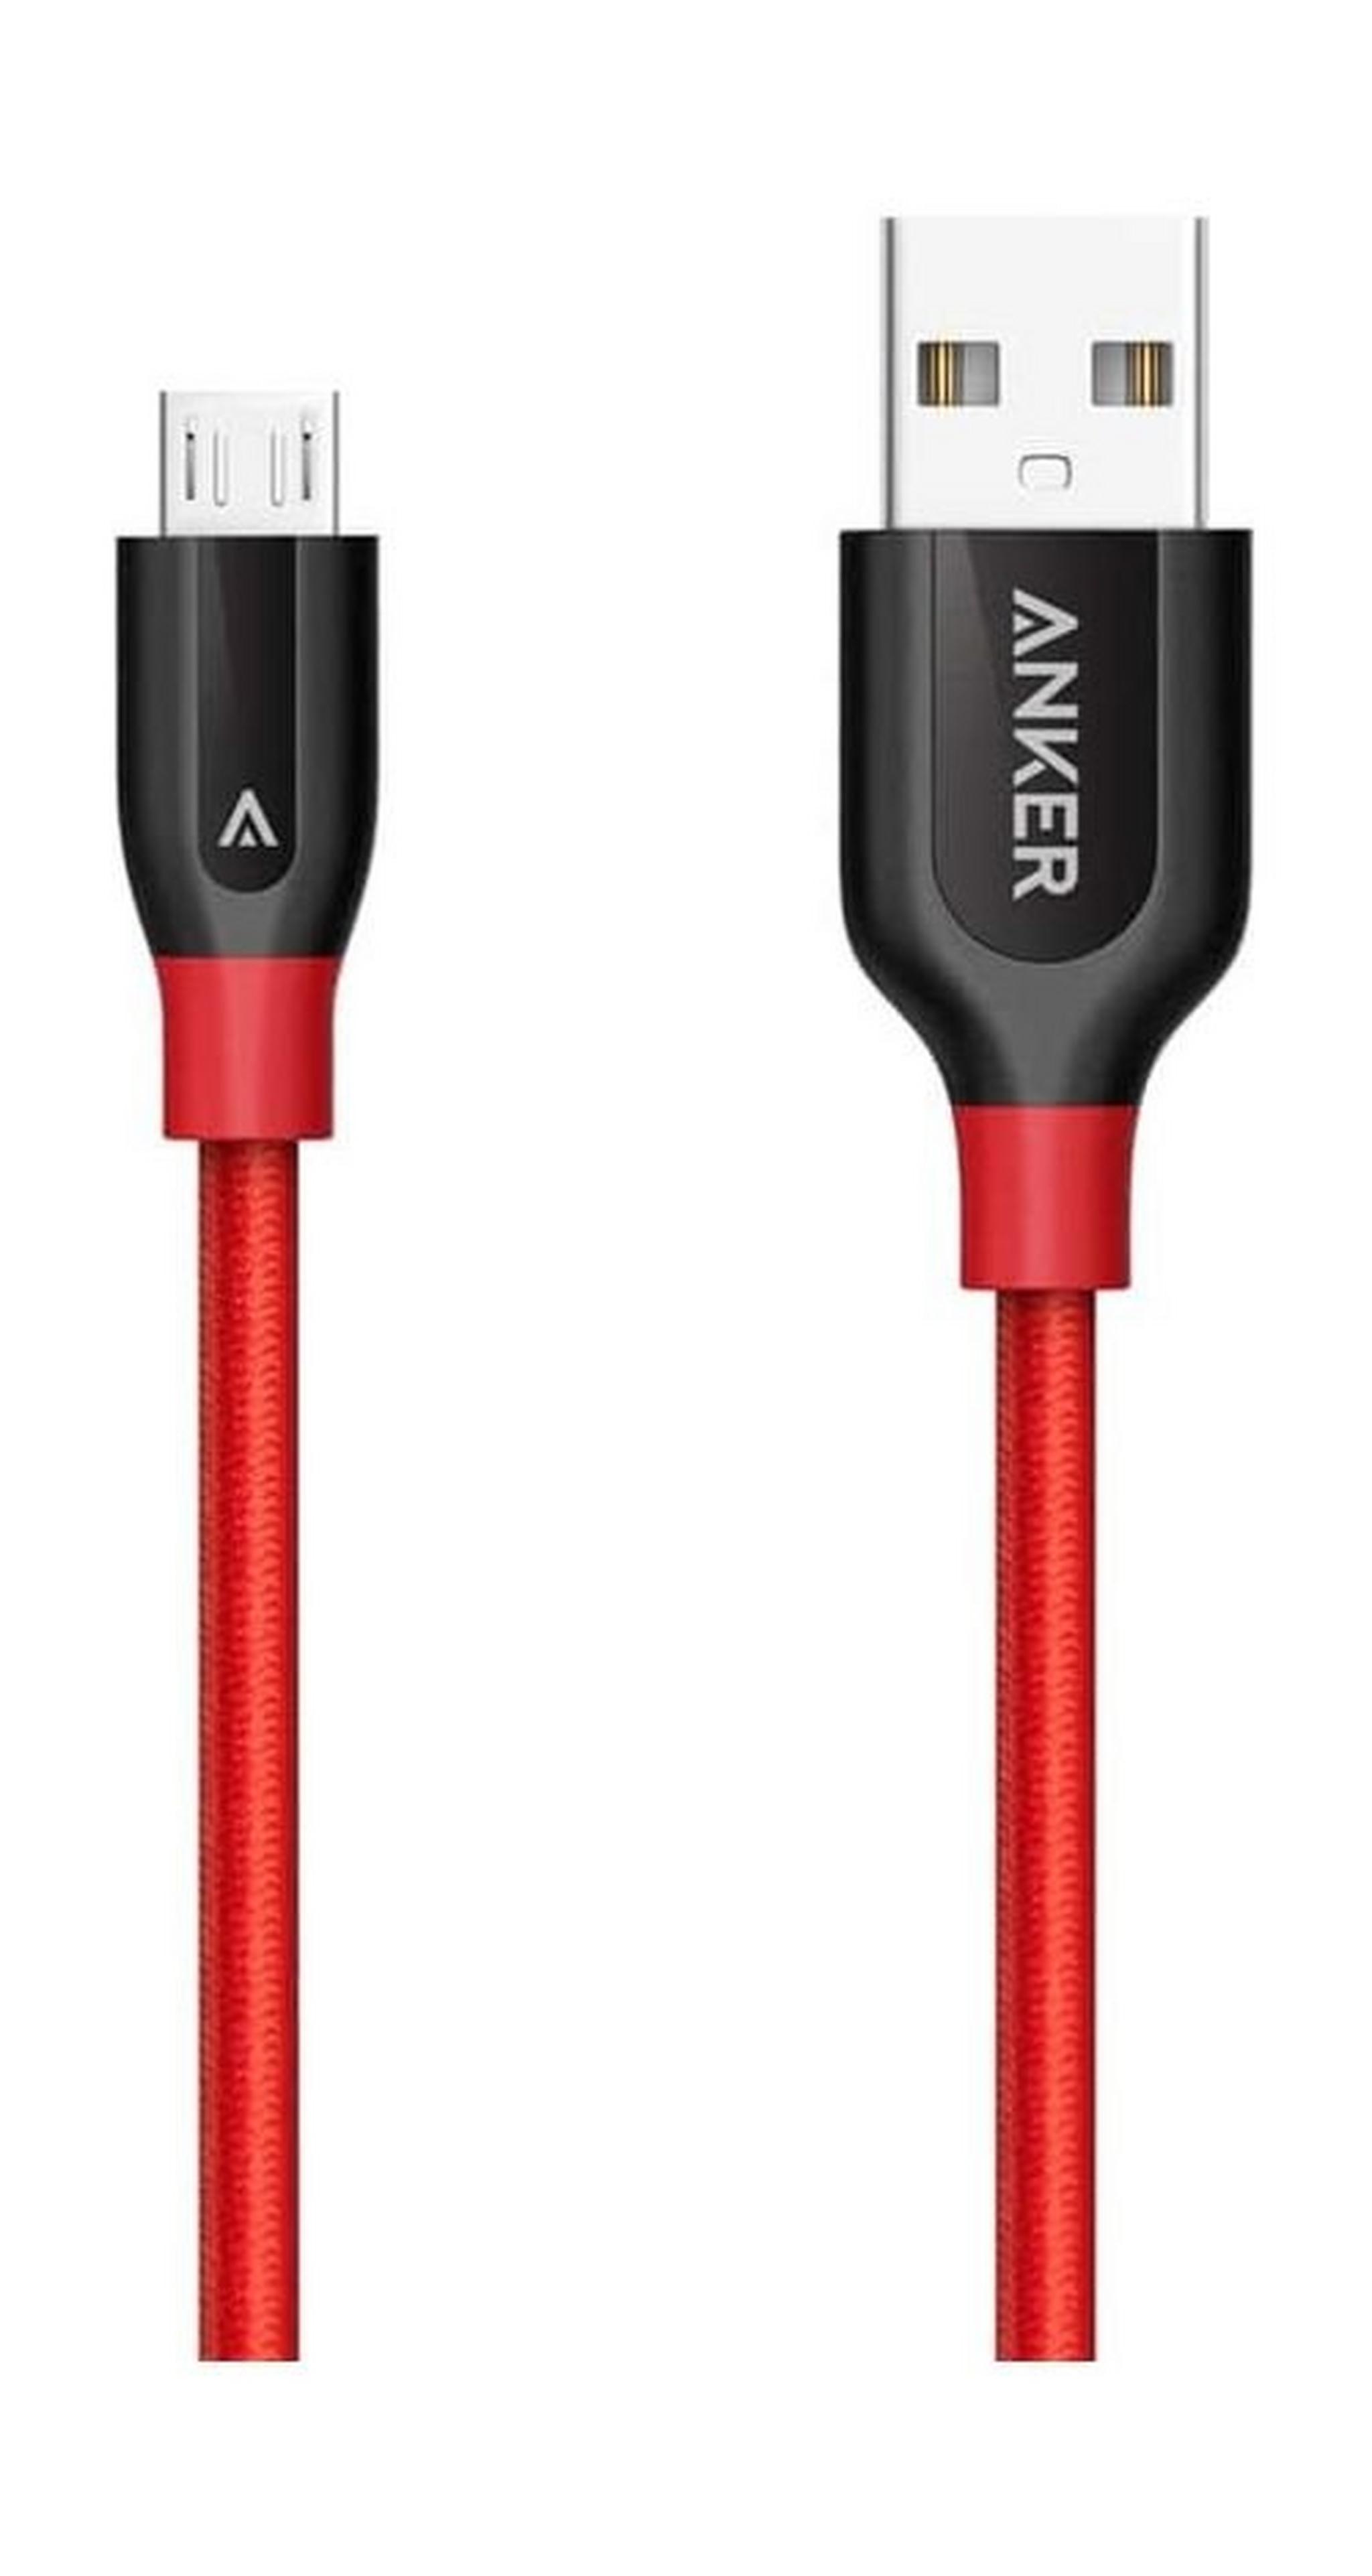 Anker PowerLine Micro USB Nylon Braided Cable 0.9M (A8142H91) - Red